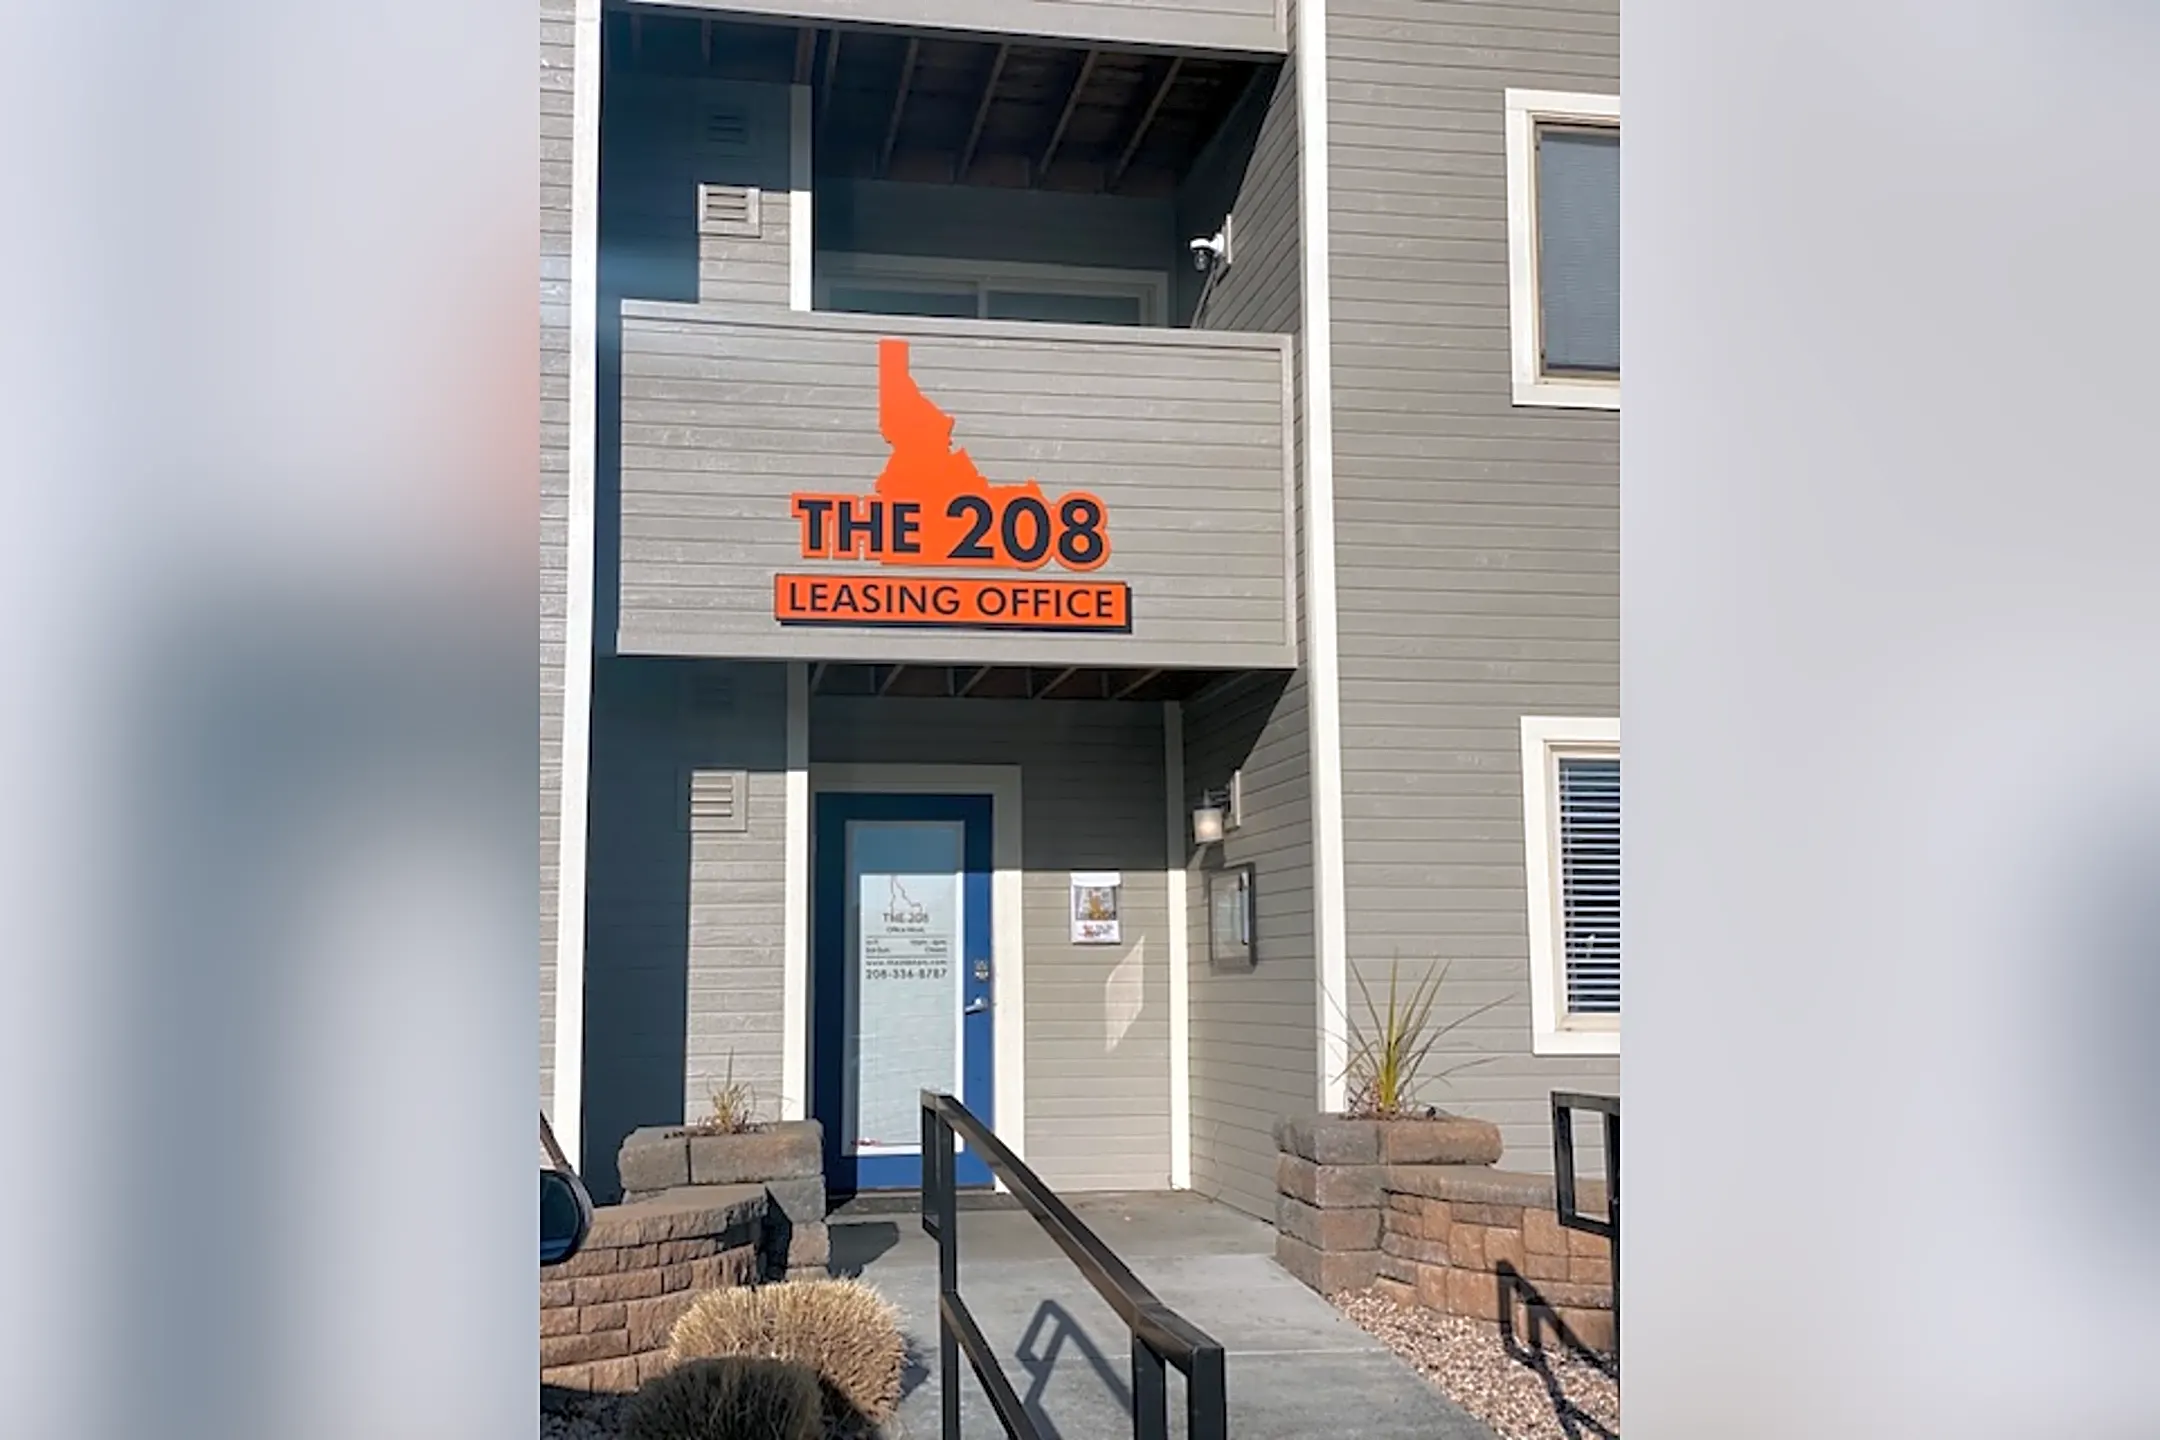 Leasing Office - The 208 - Boise, ID